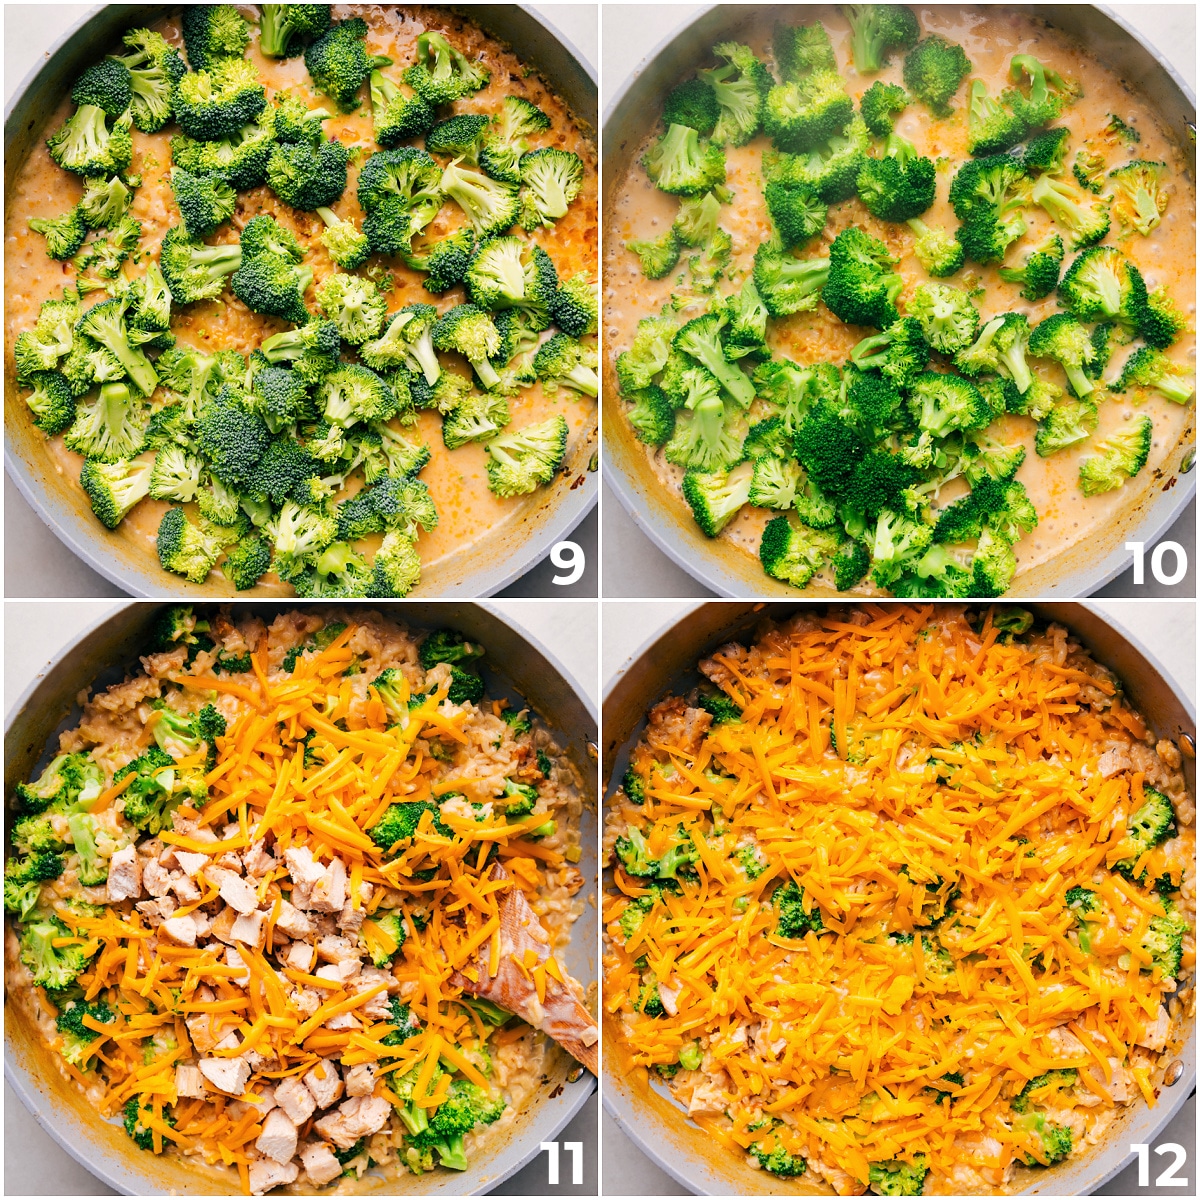 Broccoli, cheese, and chicken being added to the skillet for this delicious Creamy Chicken Broccoli Rice Casserole.